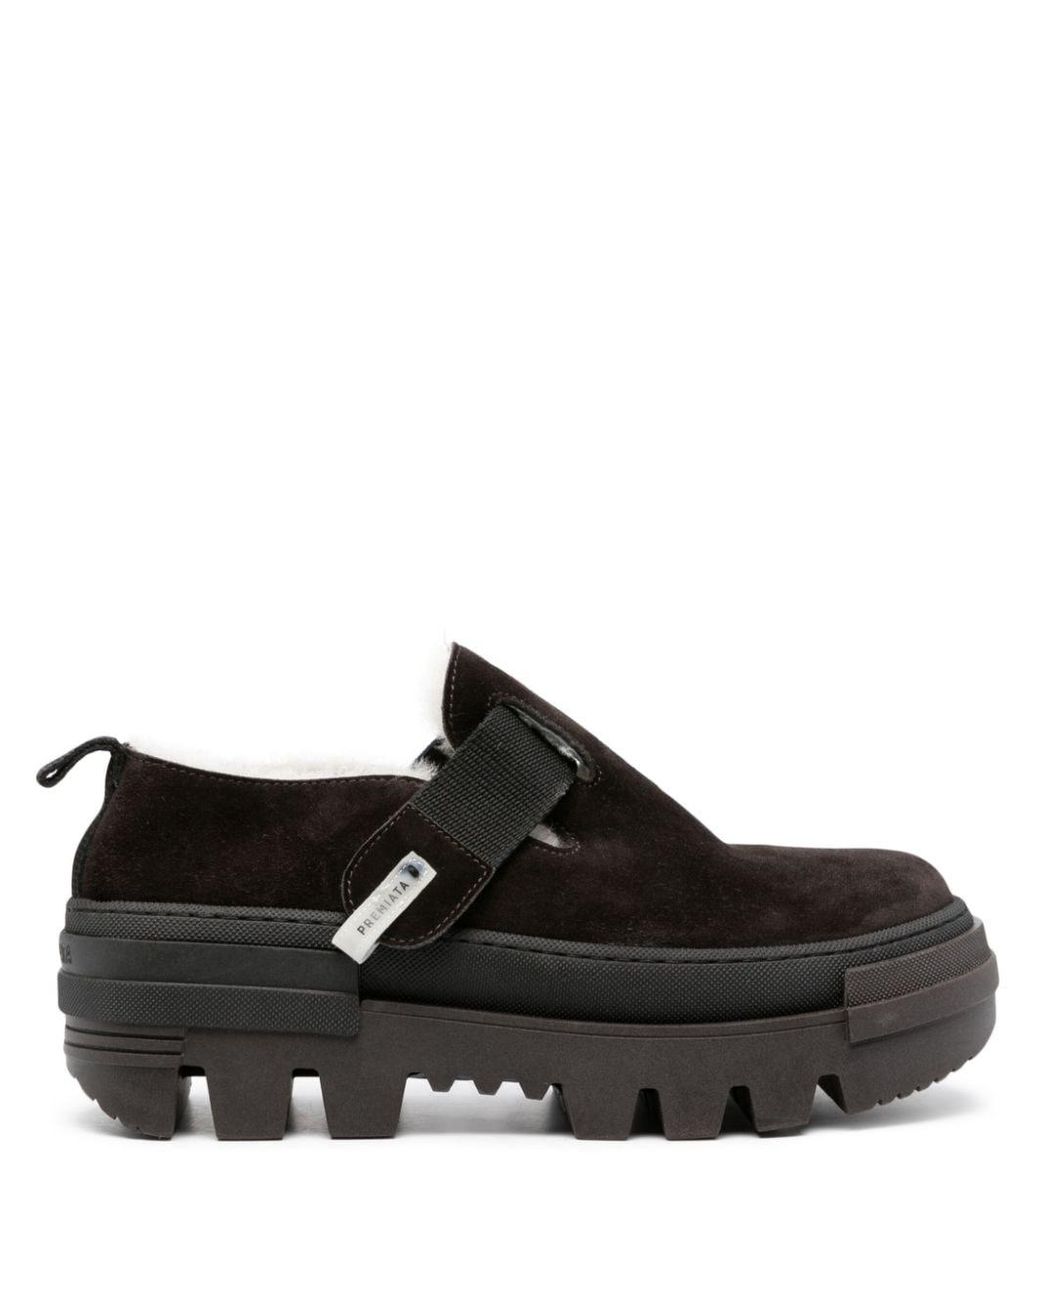 Premiata Shearling-lining Suede Loafers in Black | Lyst